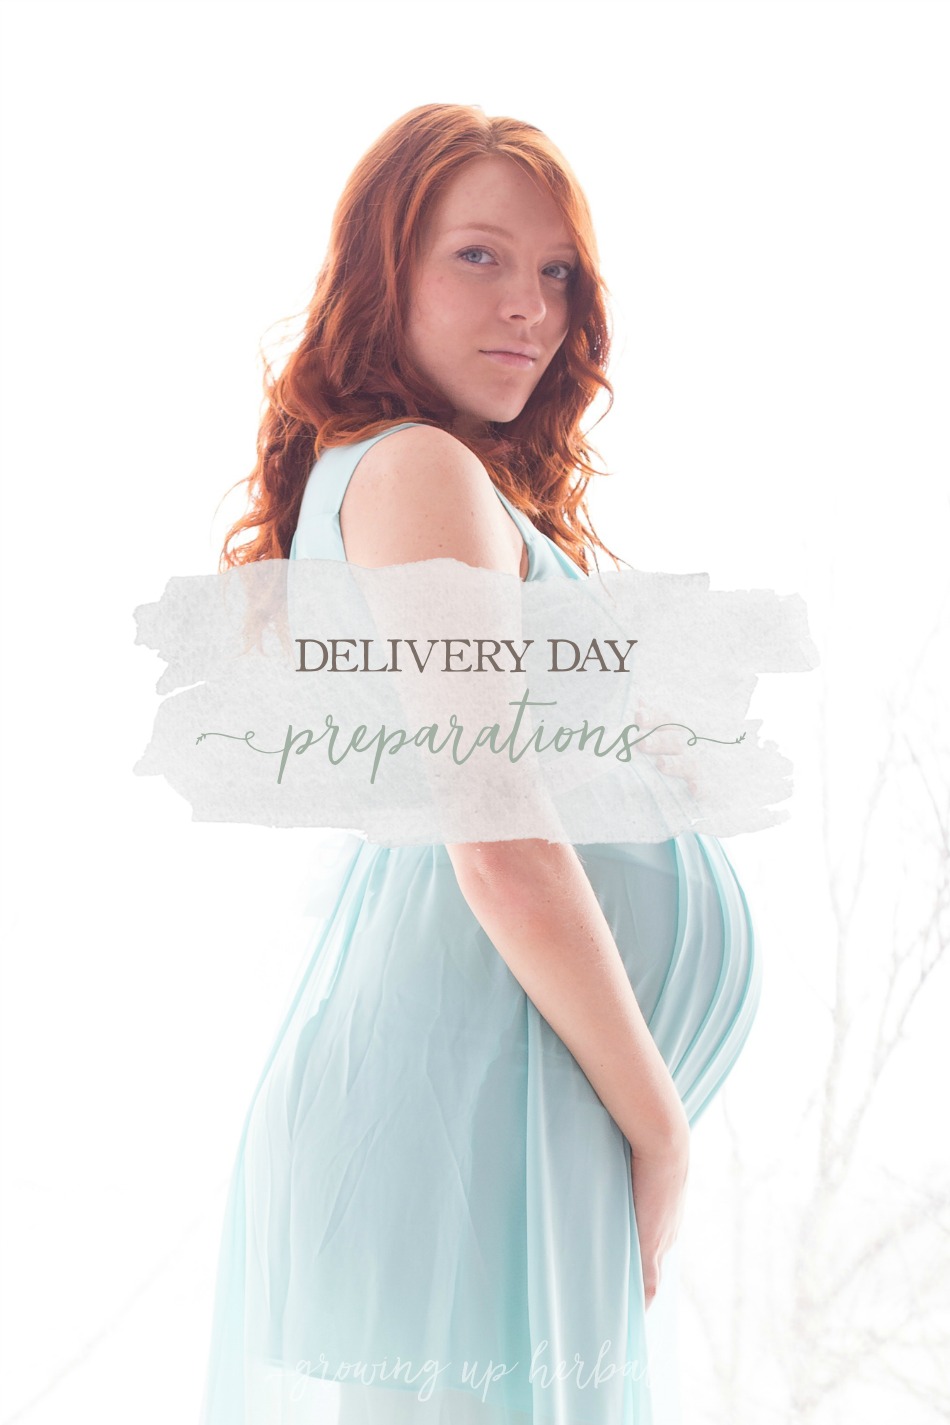 Delivery Day Preparations | Growing Up Herbal | Delivery day will be here before you know it. Here are some things to do in preparation for the big day!